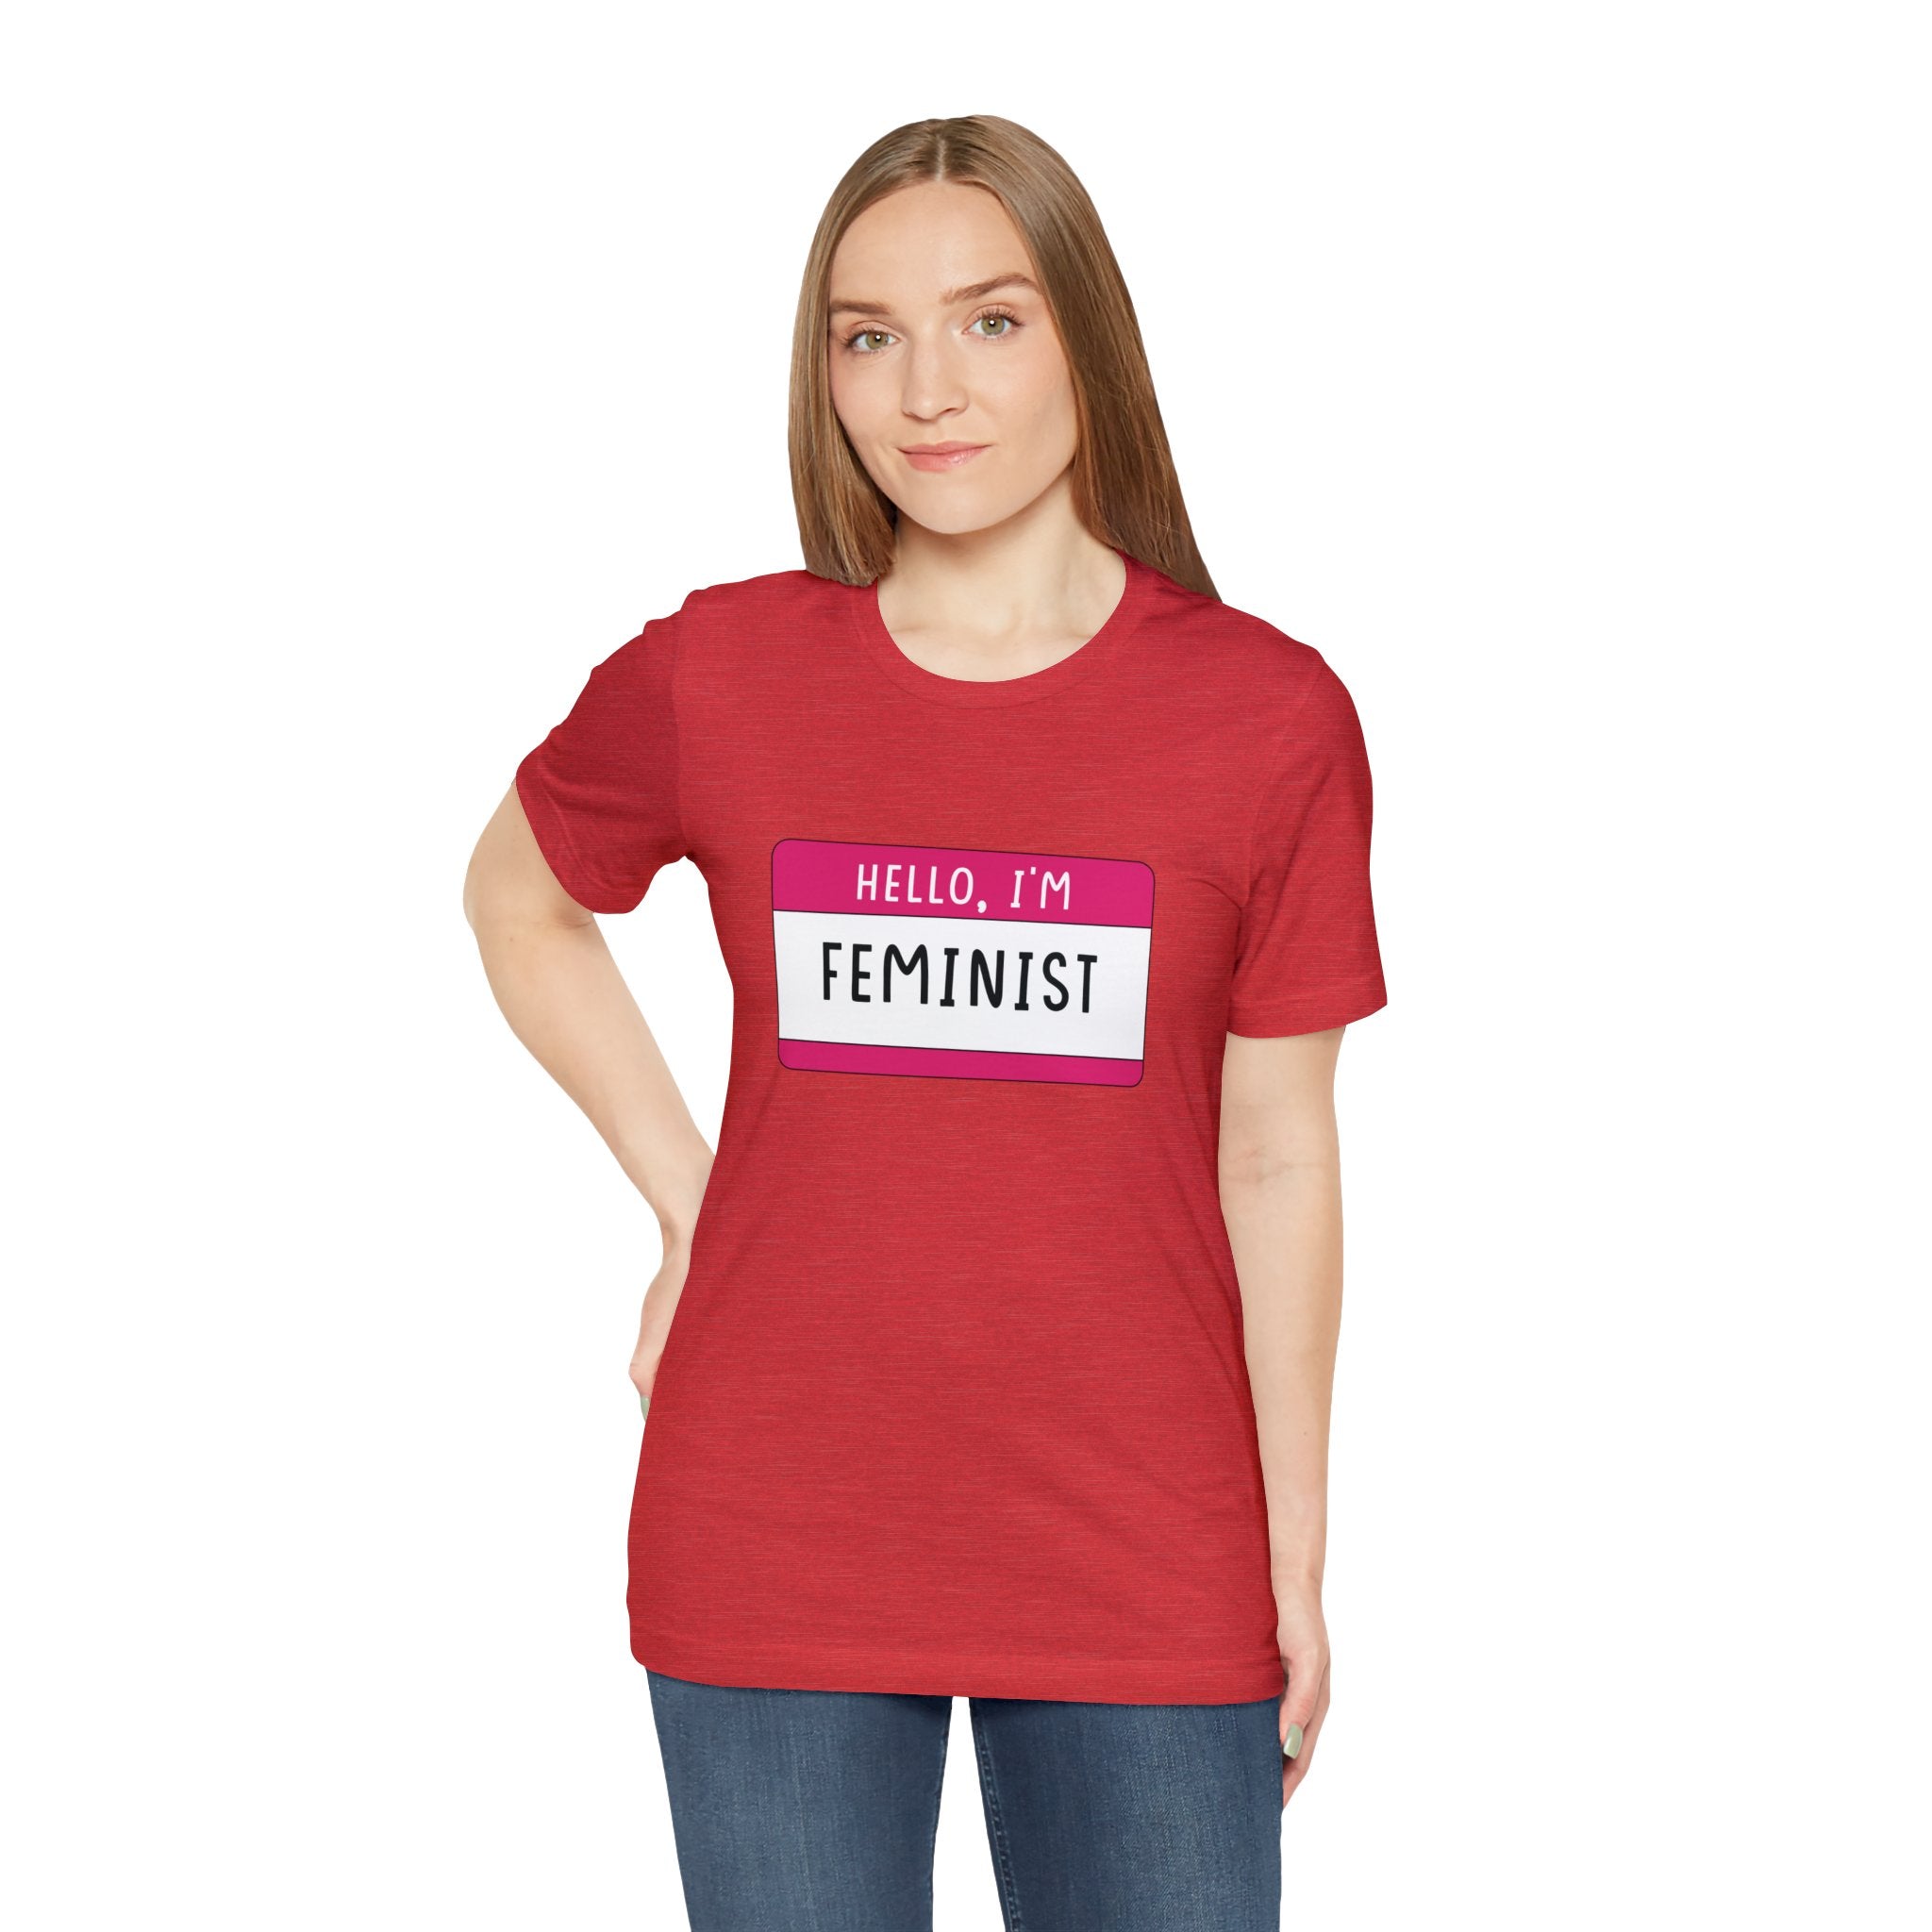 Woman in a red Hello, I'm Feminist t-shirt with a "hello, I'm feminist" badge, standing against a plain background.